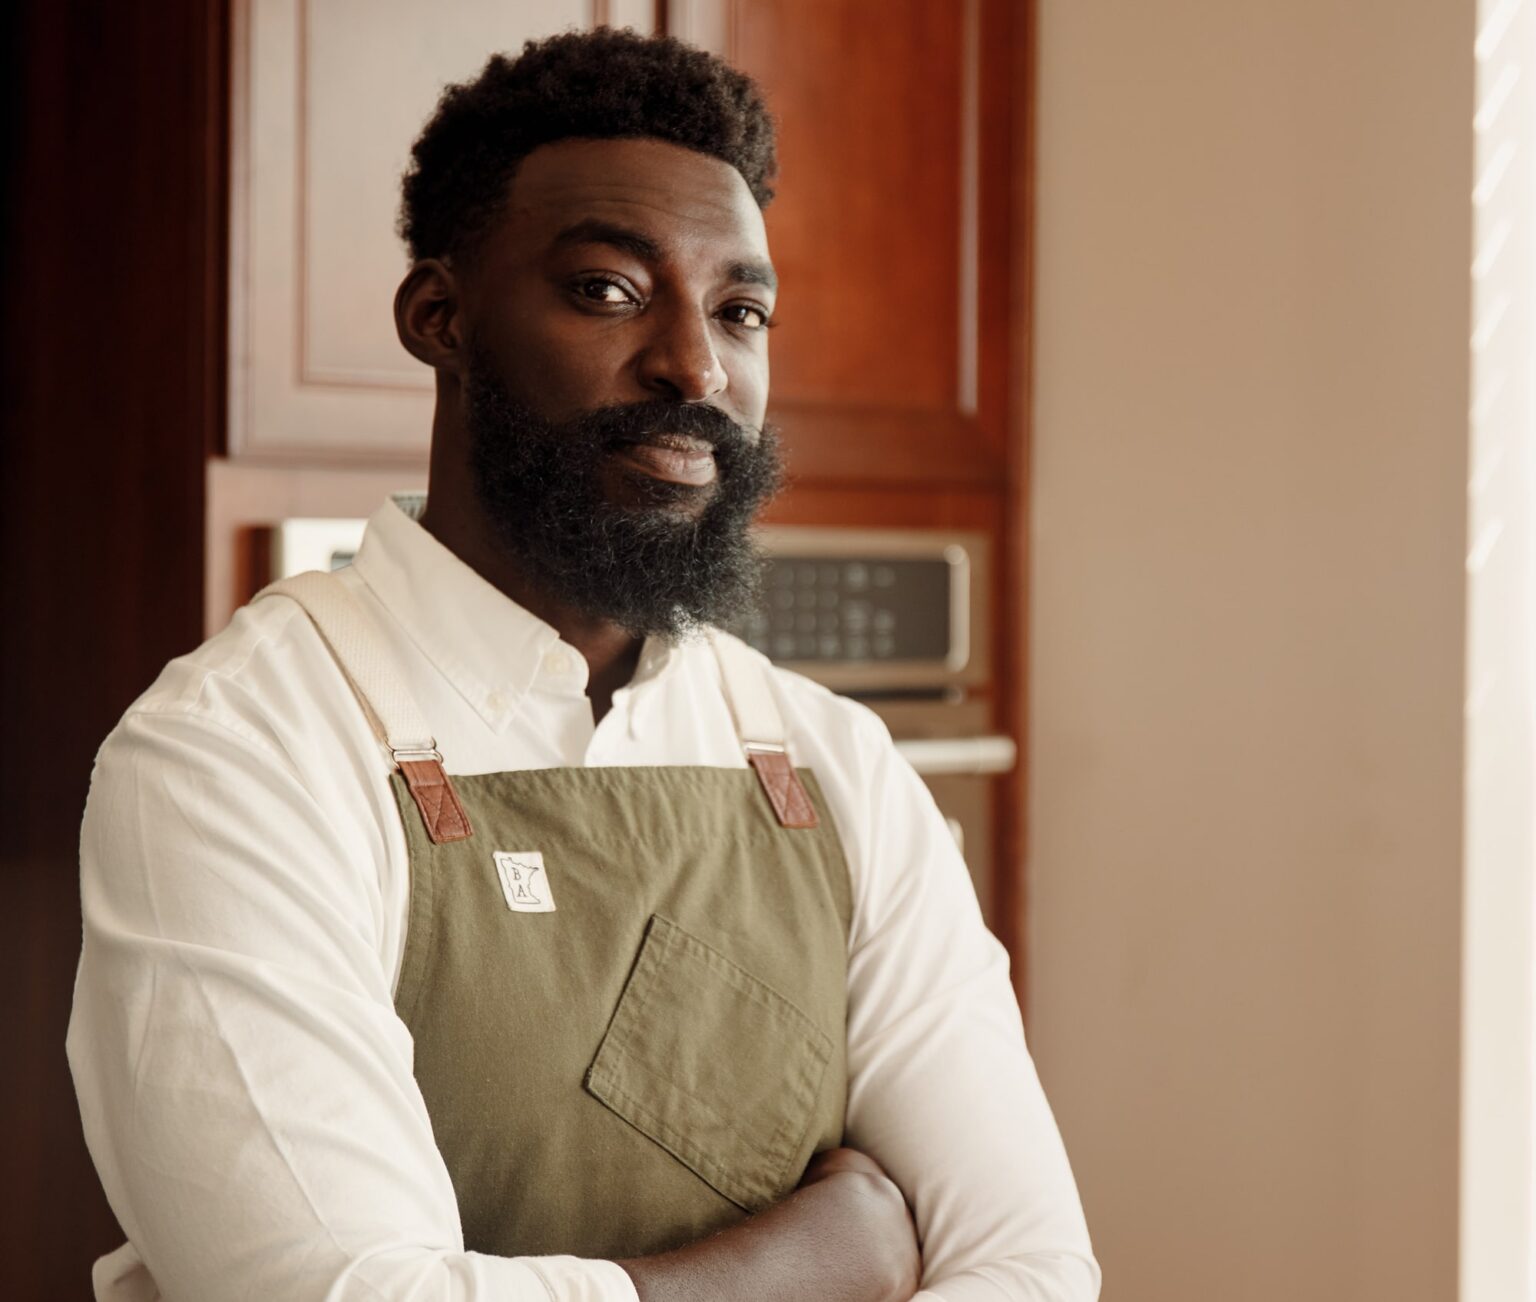 'Top Chef' favorite Eric Adjepong is partnering with AYO Foods for a delicious new project. Make your next dinner a winner with these West African dishes.